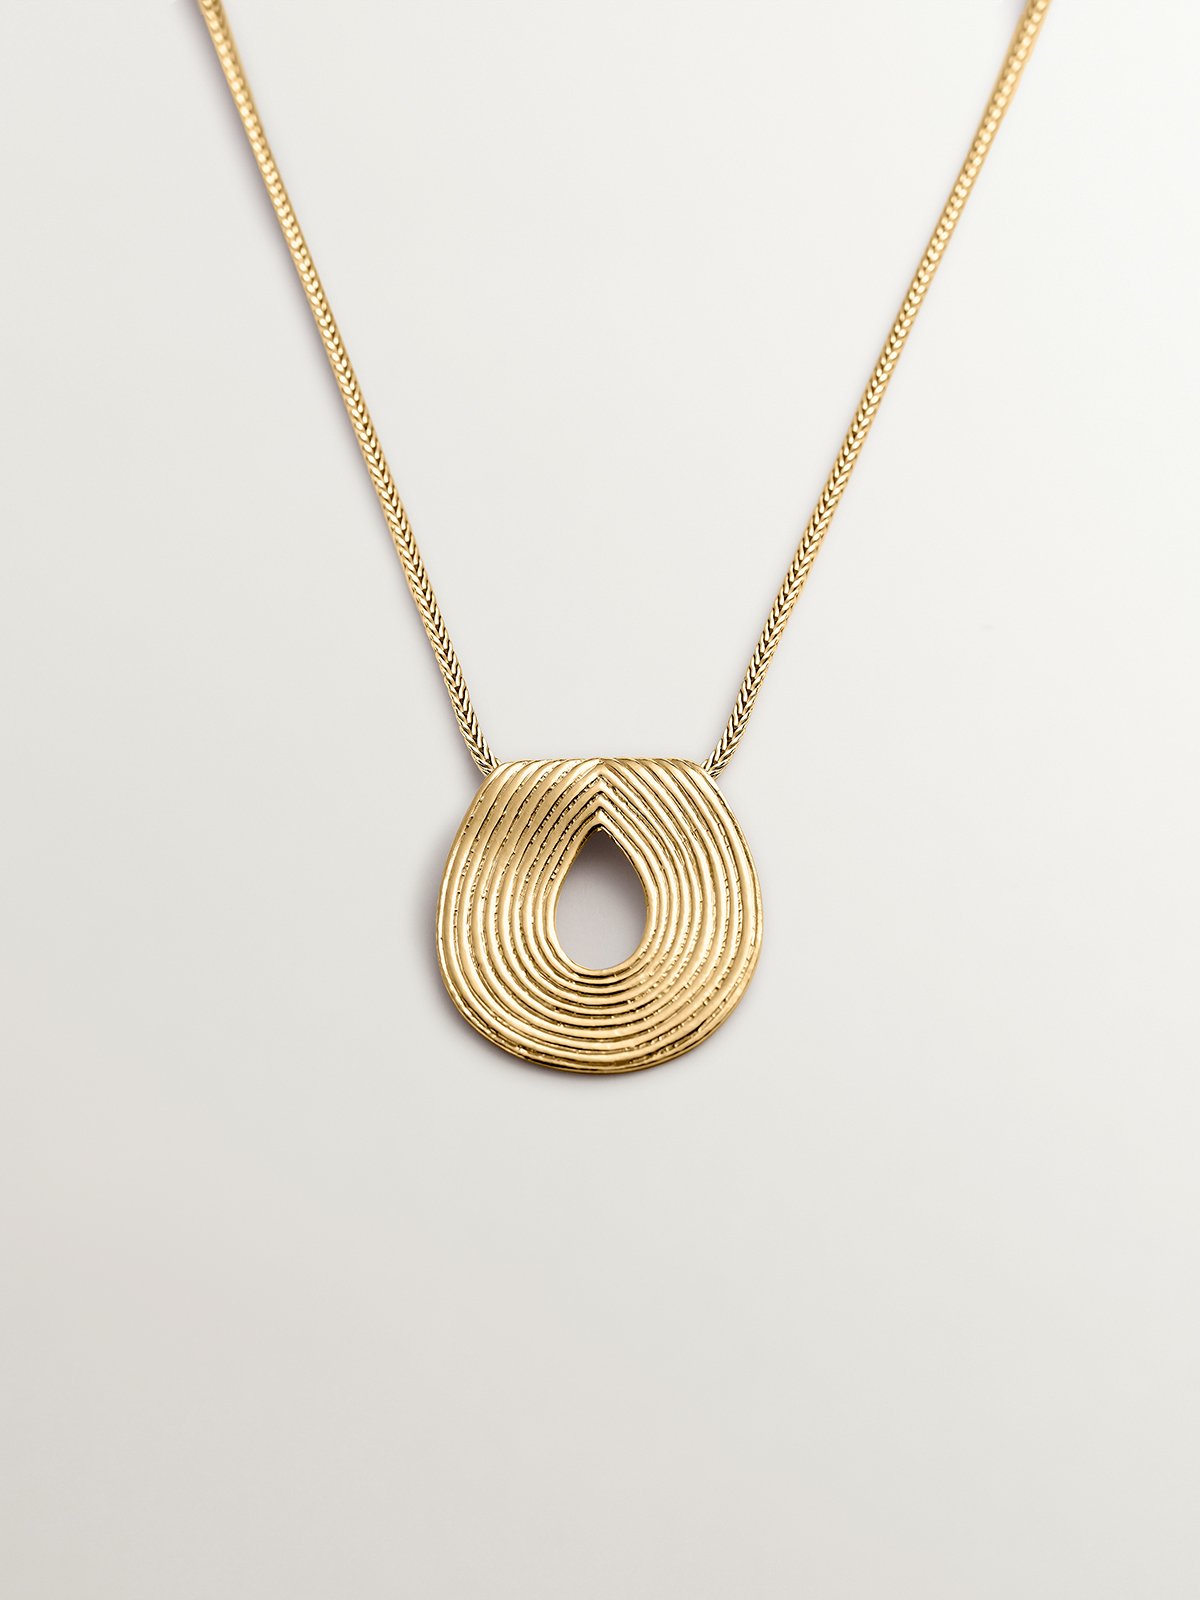 Oval pendant made of 925 silver bathed in 18K yellow gold with relief.